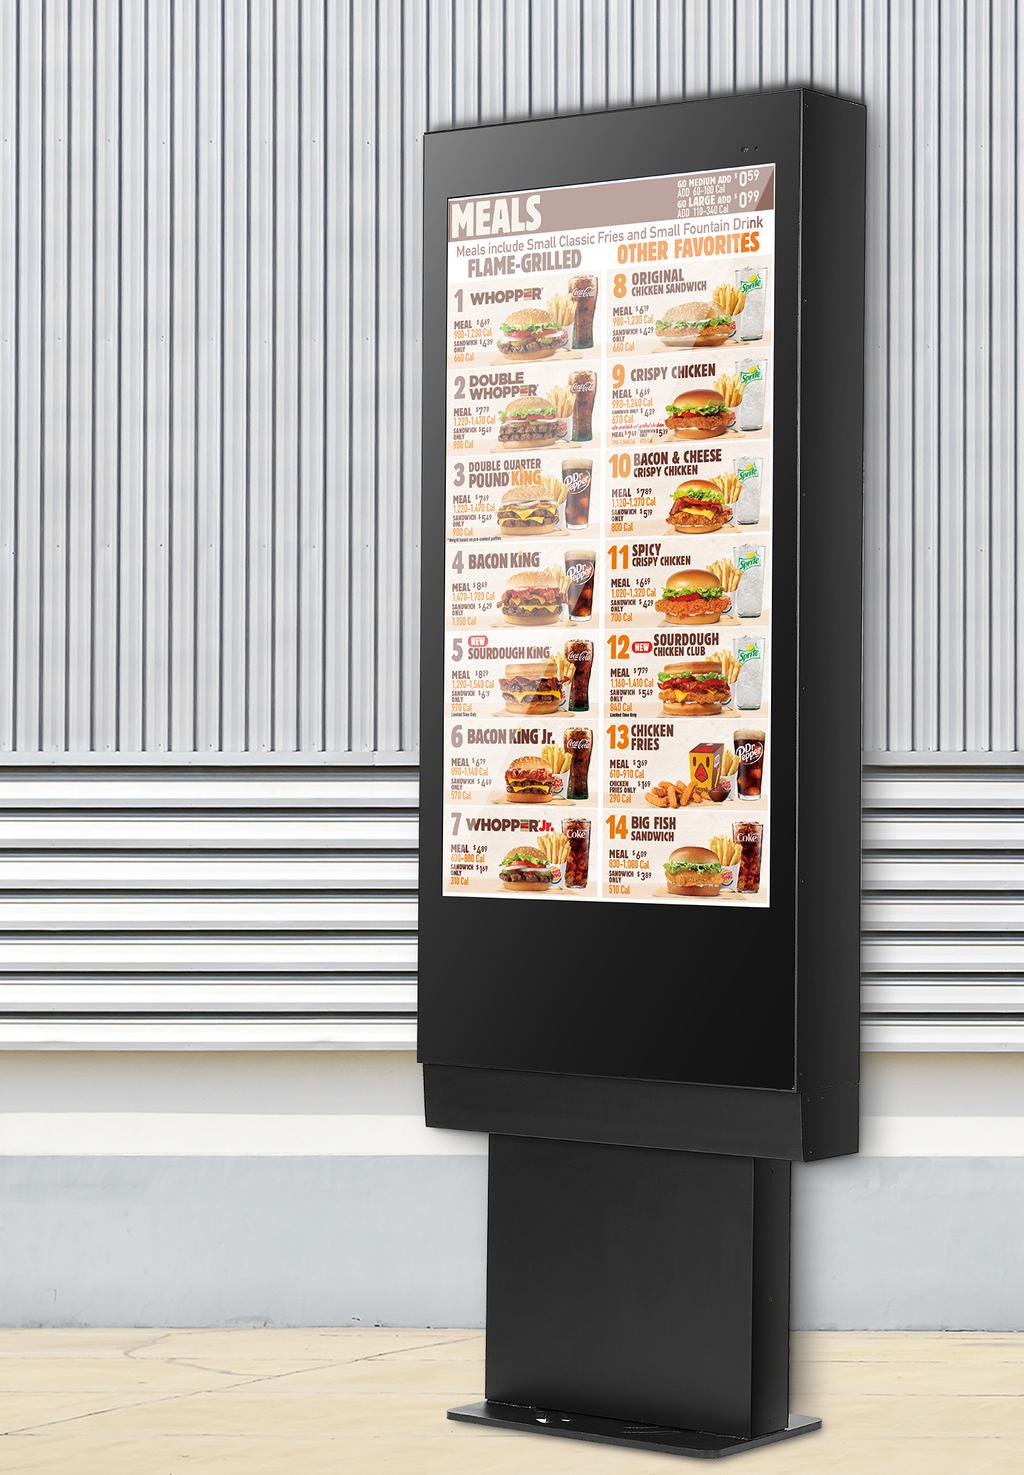 Effective Advertising Digital menu boards and promotional displays can deliver marketing messages efficiently and effectively and are more likely to grab the customers attention than